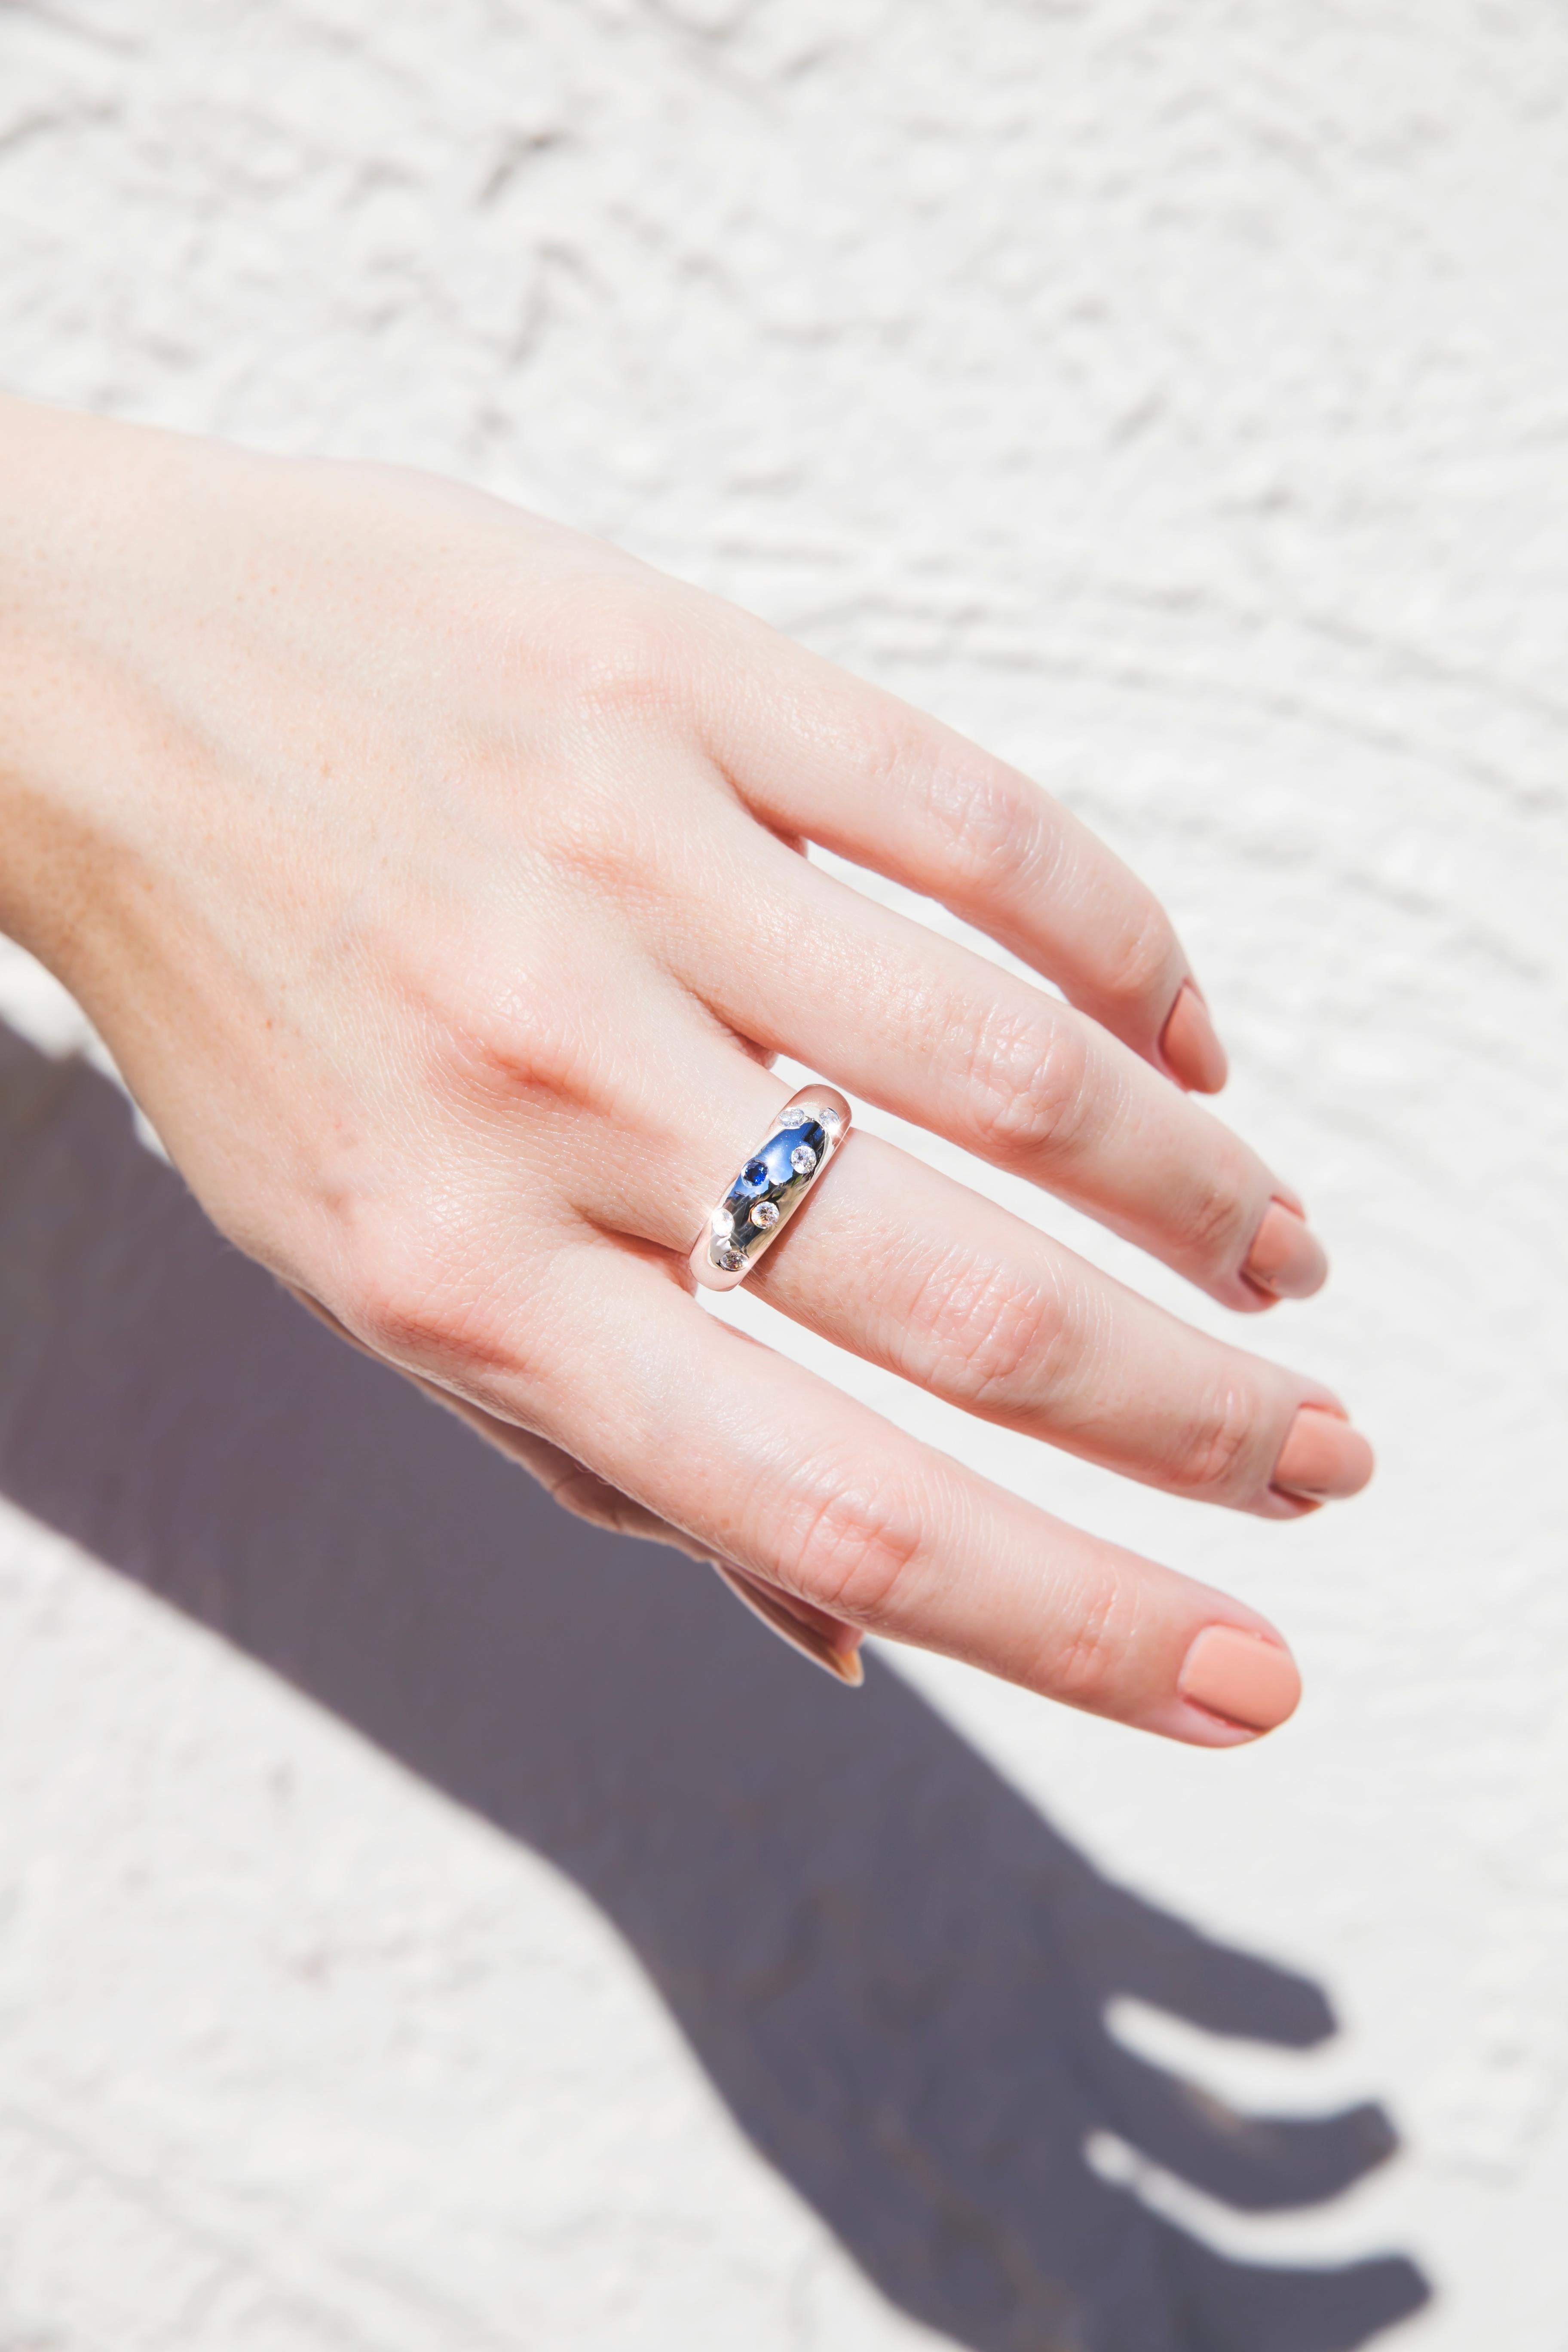 Carefully crafted in 18 carat white gold is this gorgeous diamond and sapphire dome ring features six hammer set handsome round brilliant cut diamonds and one single dark blue Sapphire.  We have named this darling piece The Belinda Ring. The Belinda